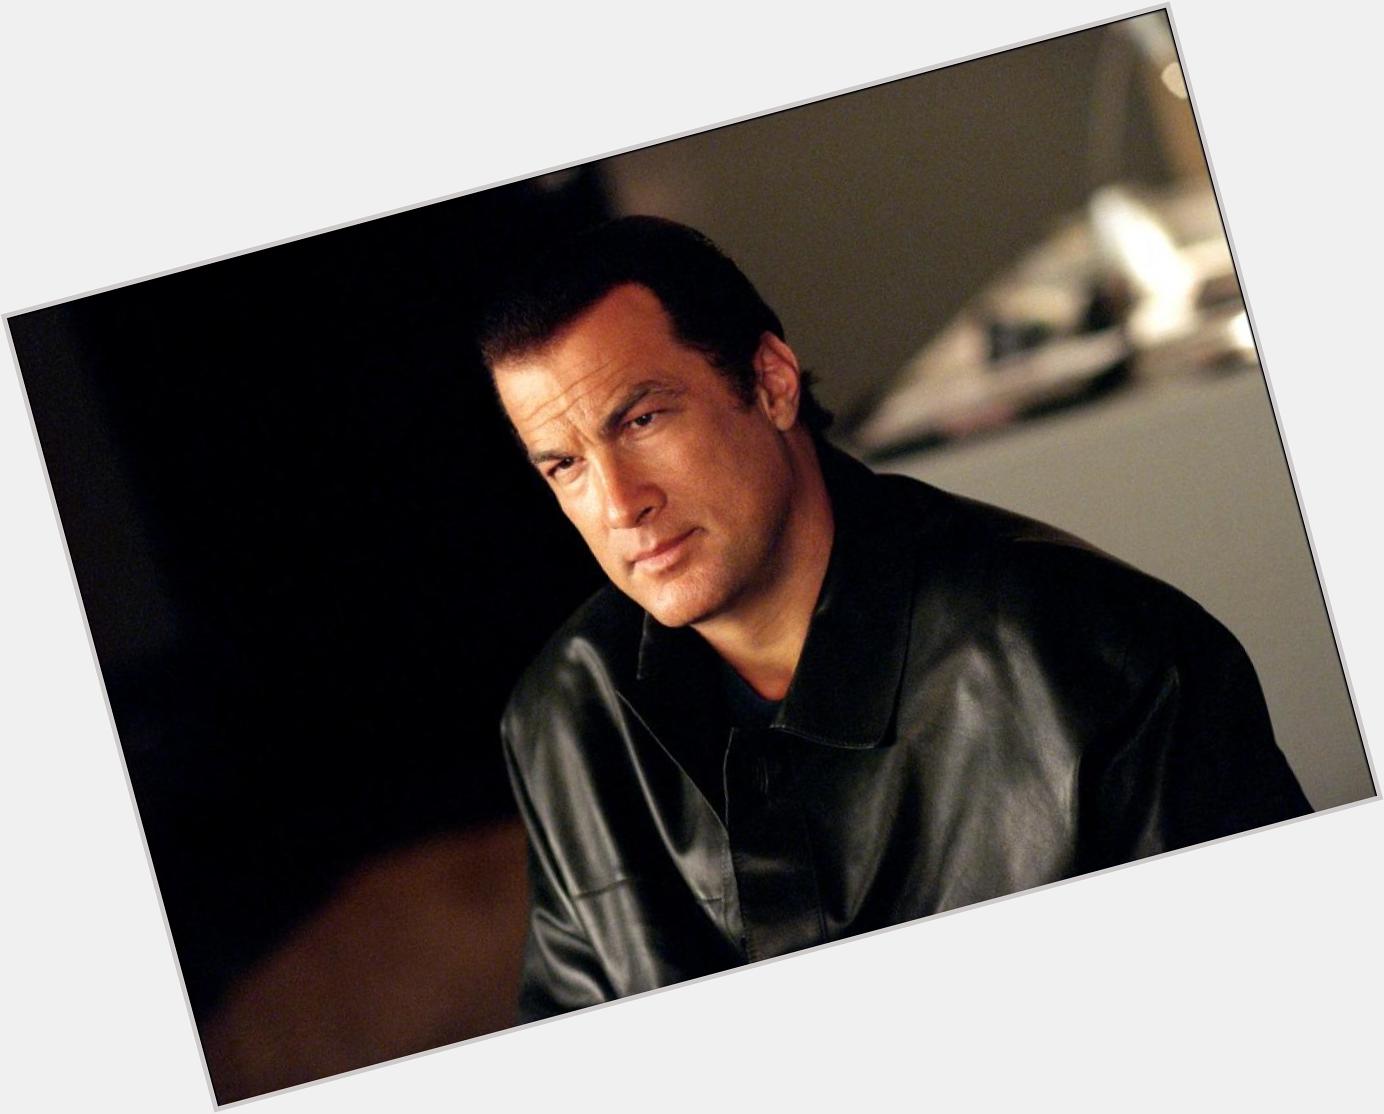 Happy Birthday to Steven Seagal, who turns 64 today! 